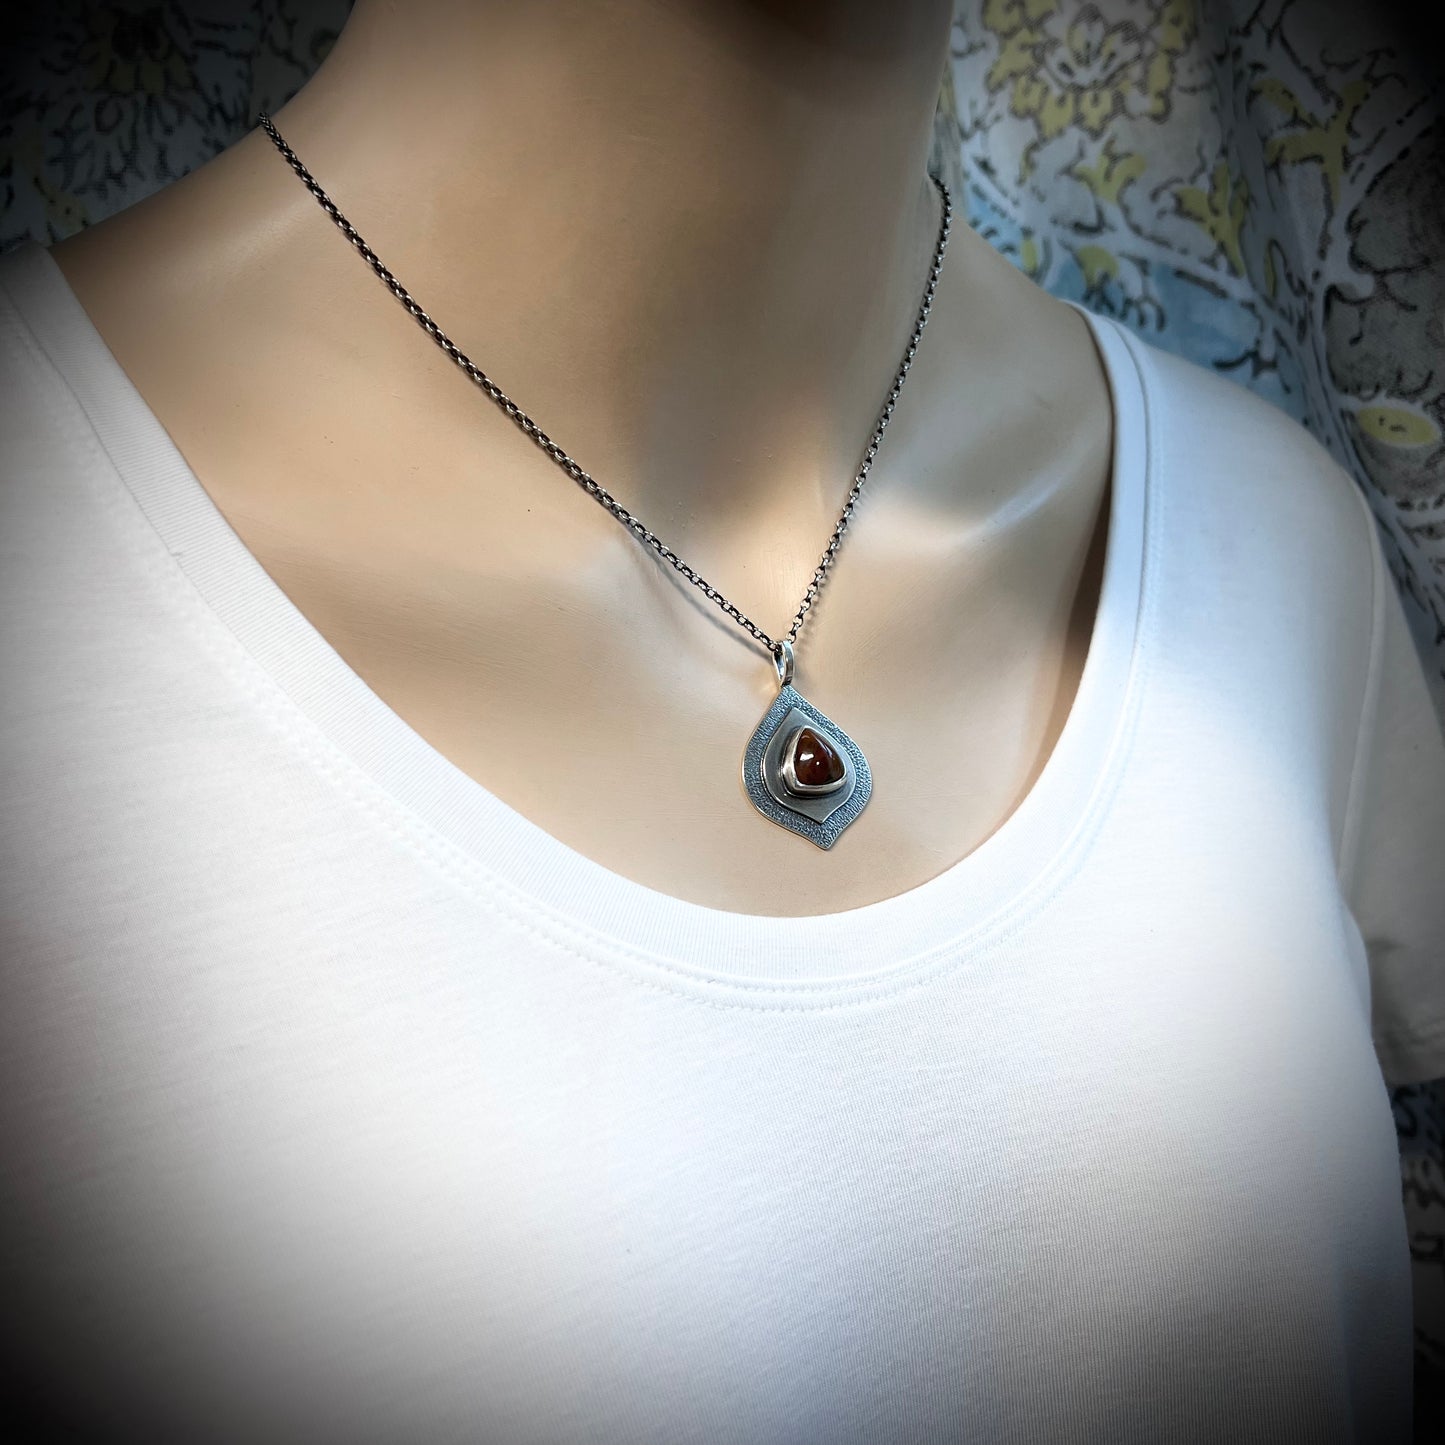 Mexican Opal Sterling Silver Necklace - Handmade One-of-a-kind Pendant on Sterling Silver Chain